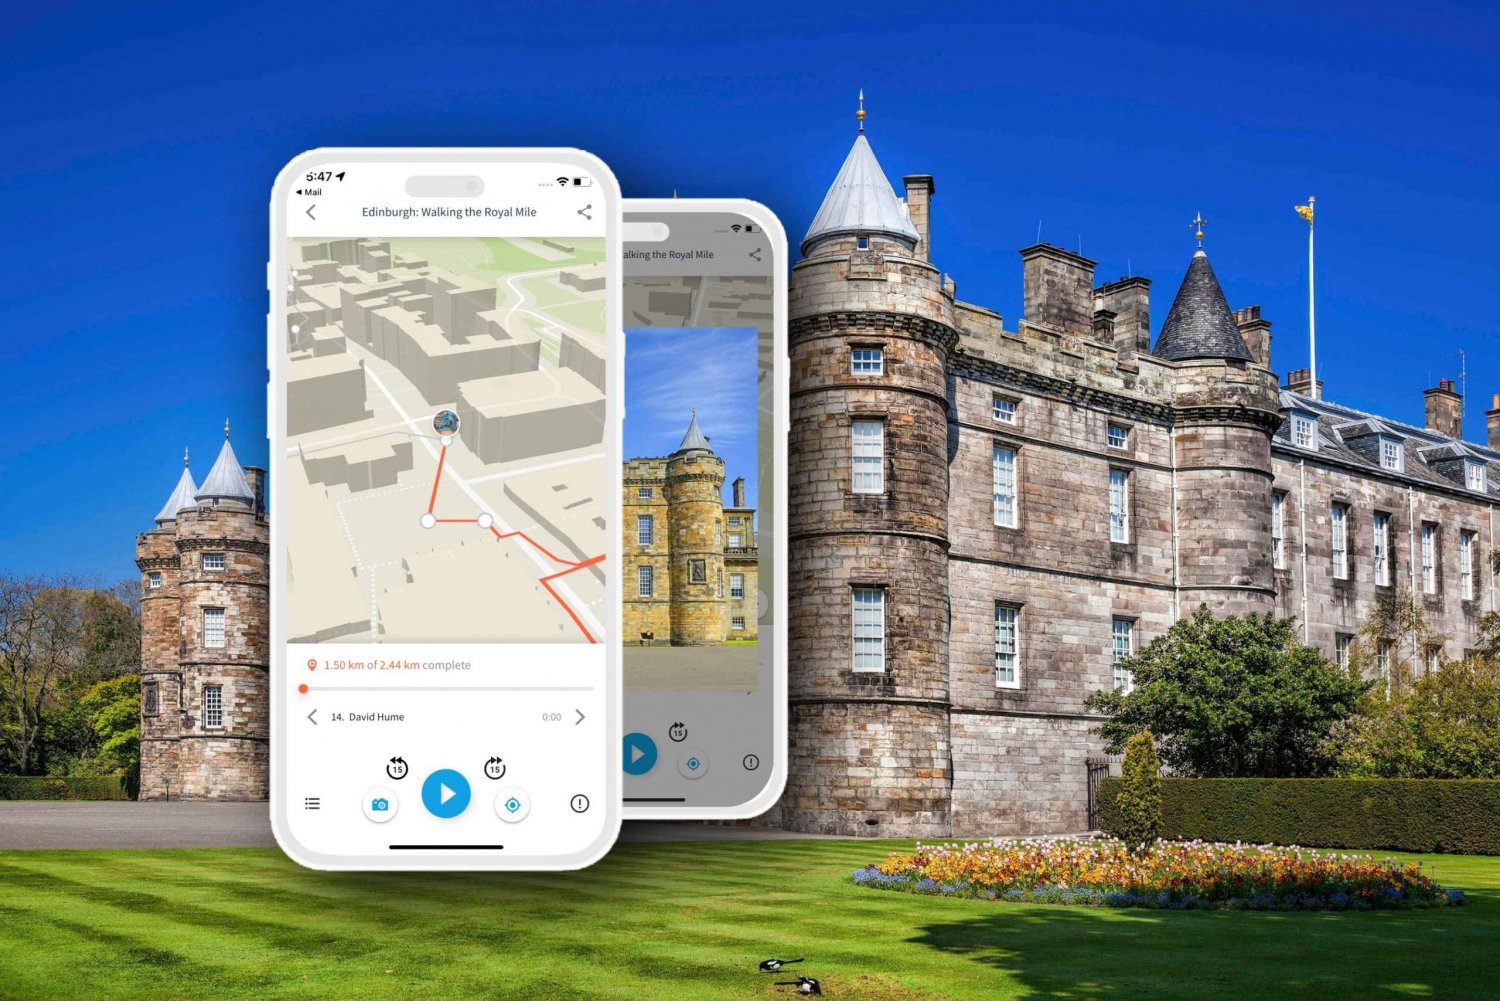 Edinbourgh, Royal mile: walking tour with audio guide